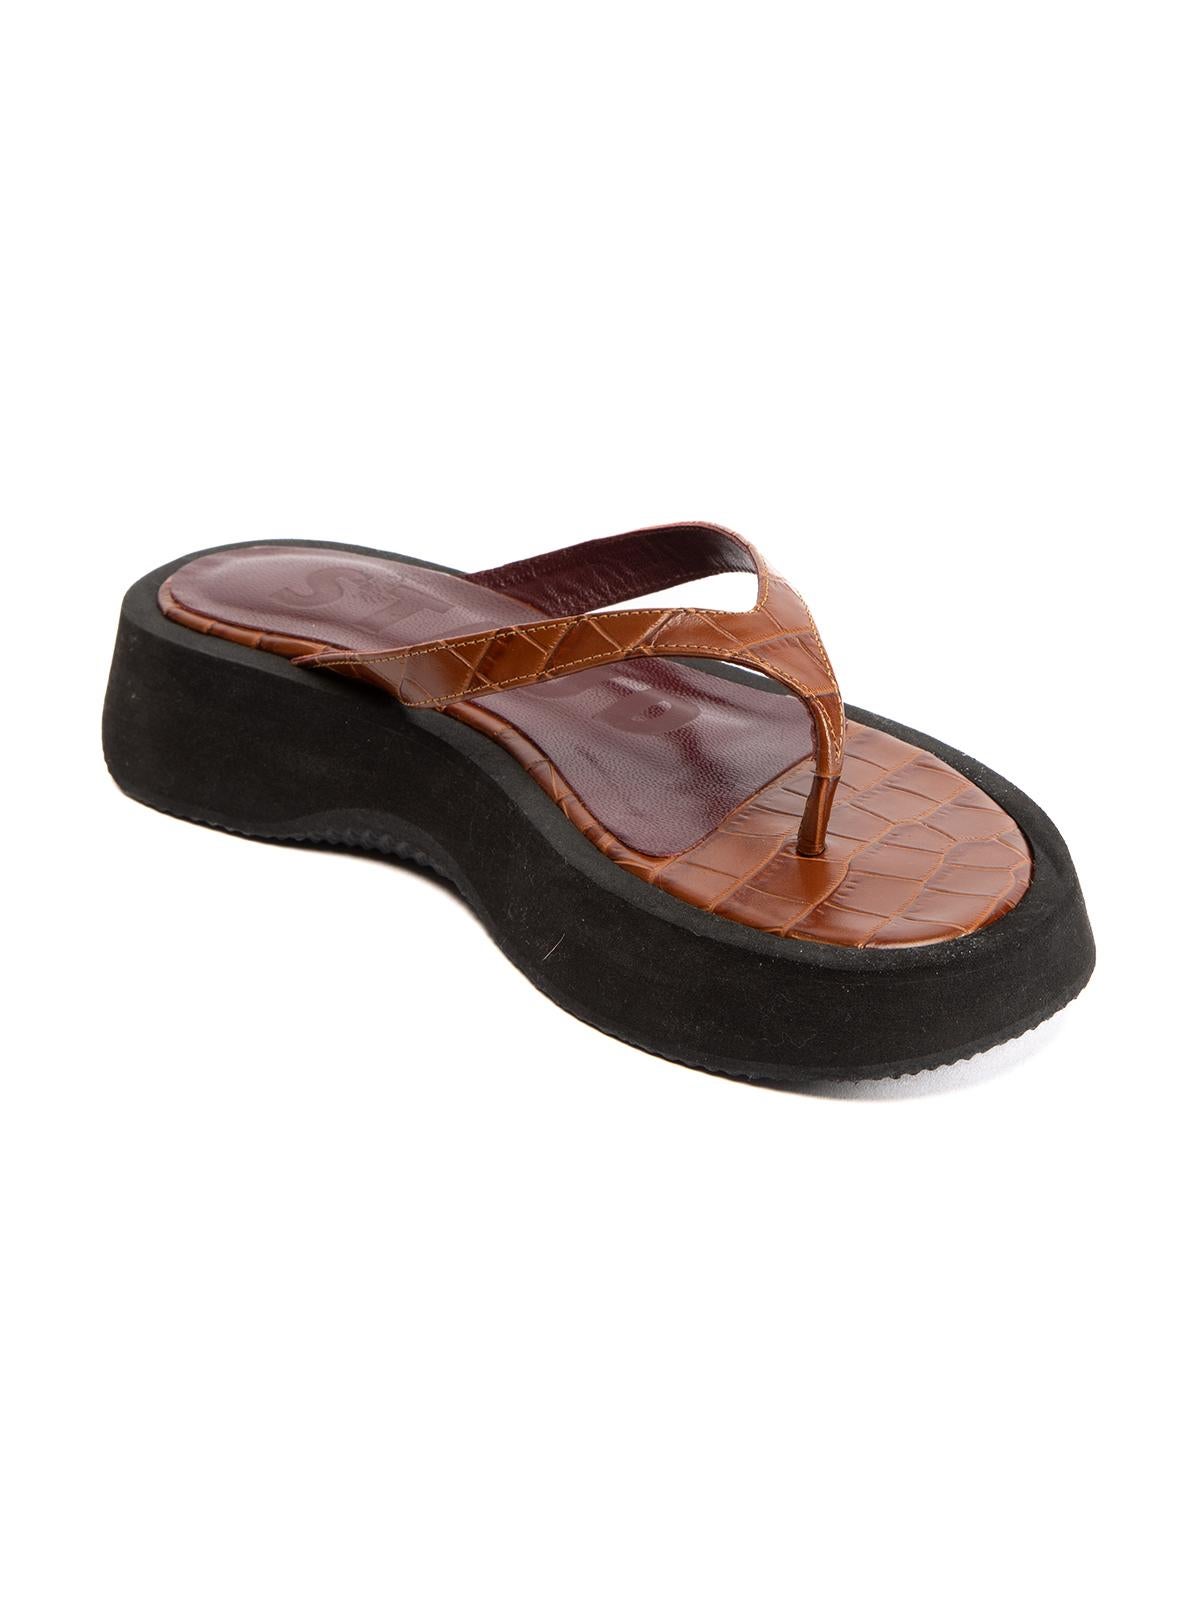 CONDITION is Very good. Minimal wear to sandals is evident. Minimal wear to the midsole on this used Staud designer resale item.   Details  Brown Leather Thong Flatform    Composition EXTERIOR:(leather) INTERIOR: (leather, rubber)    Size & Fit Heel